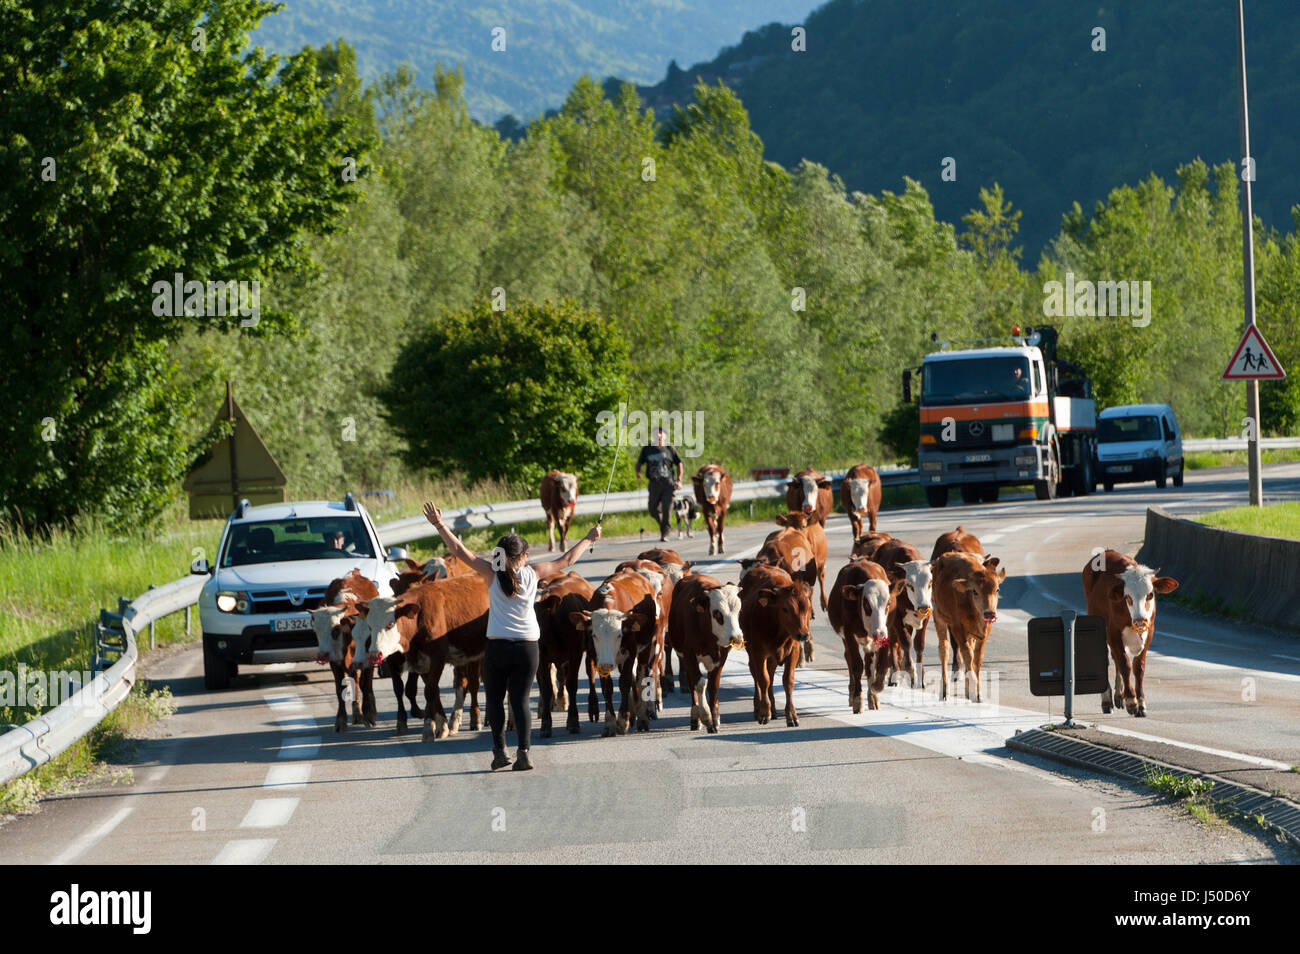 Marthod, Savoie, France. 15th May, 2017. Cattle are driven along a busy road, on a beautiful summer evening, in the Val d'Arly near Marthod, Savoie. Credit: Graham M. Lawrence/Alamy Live News Stock Photo